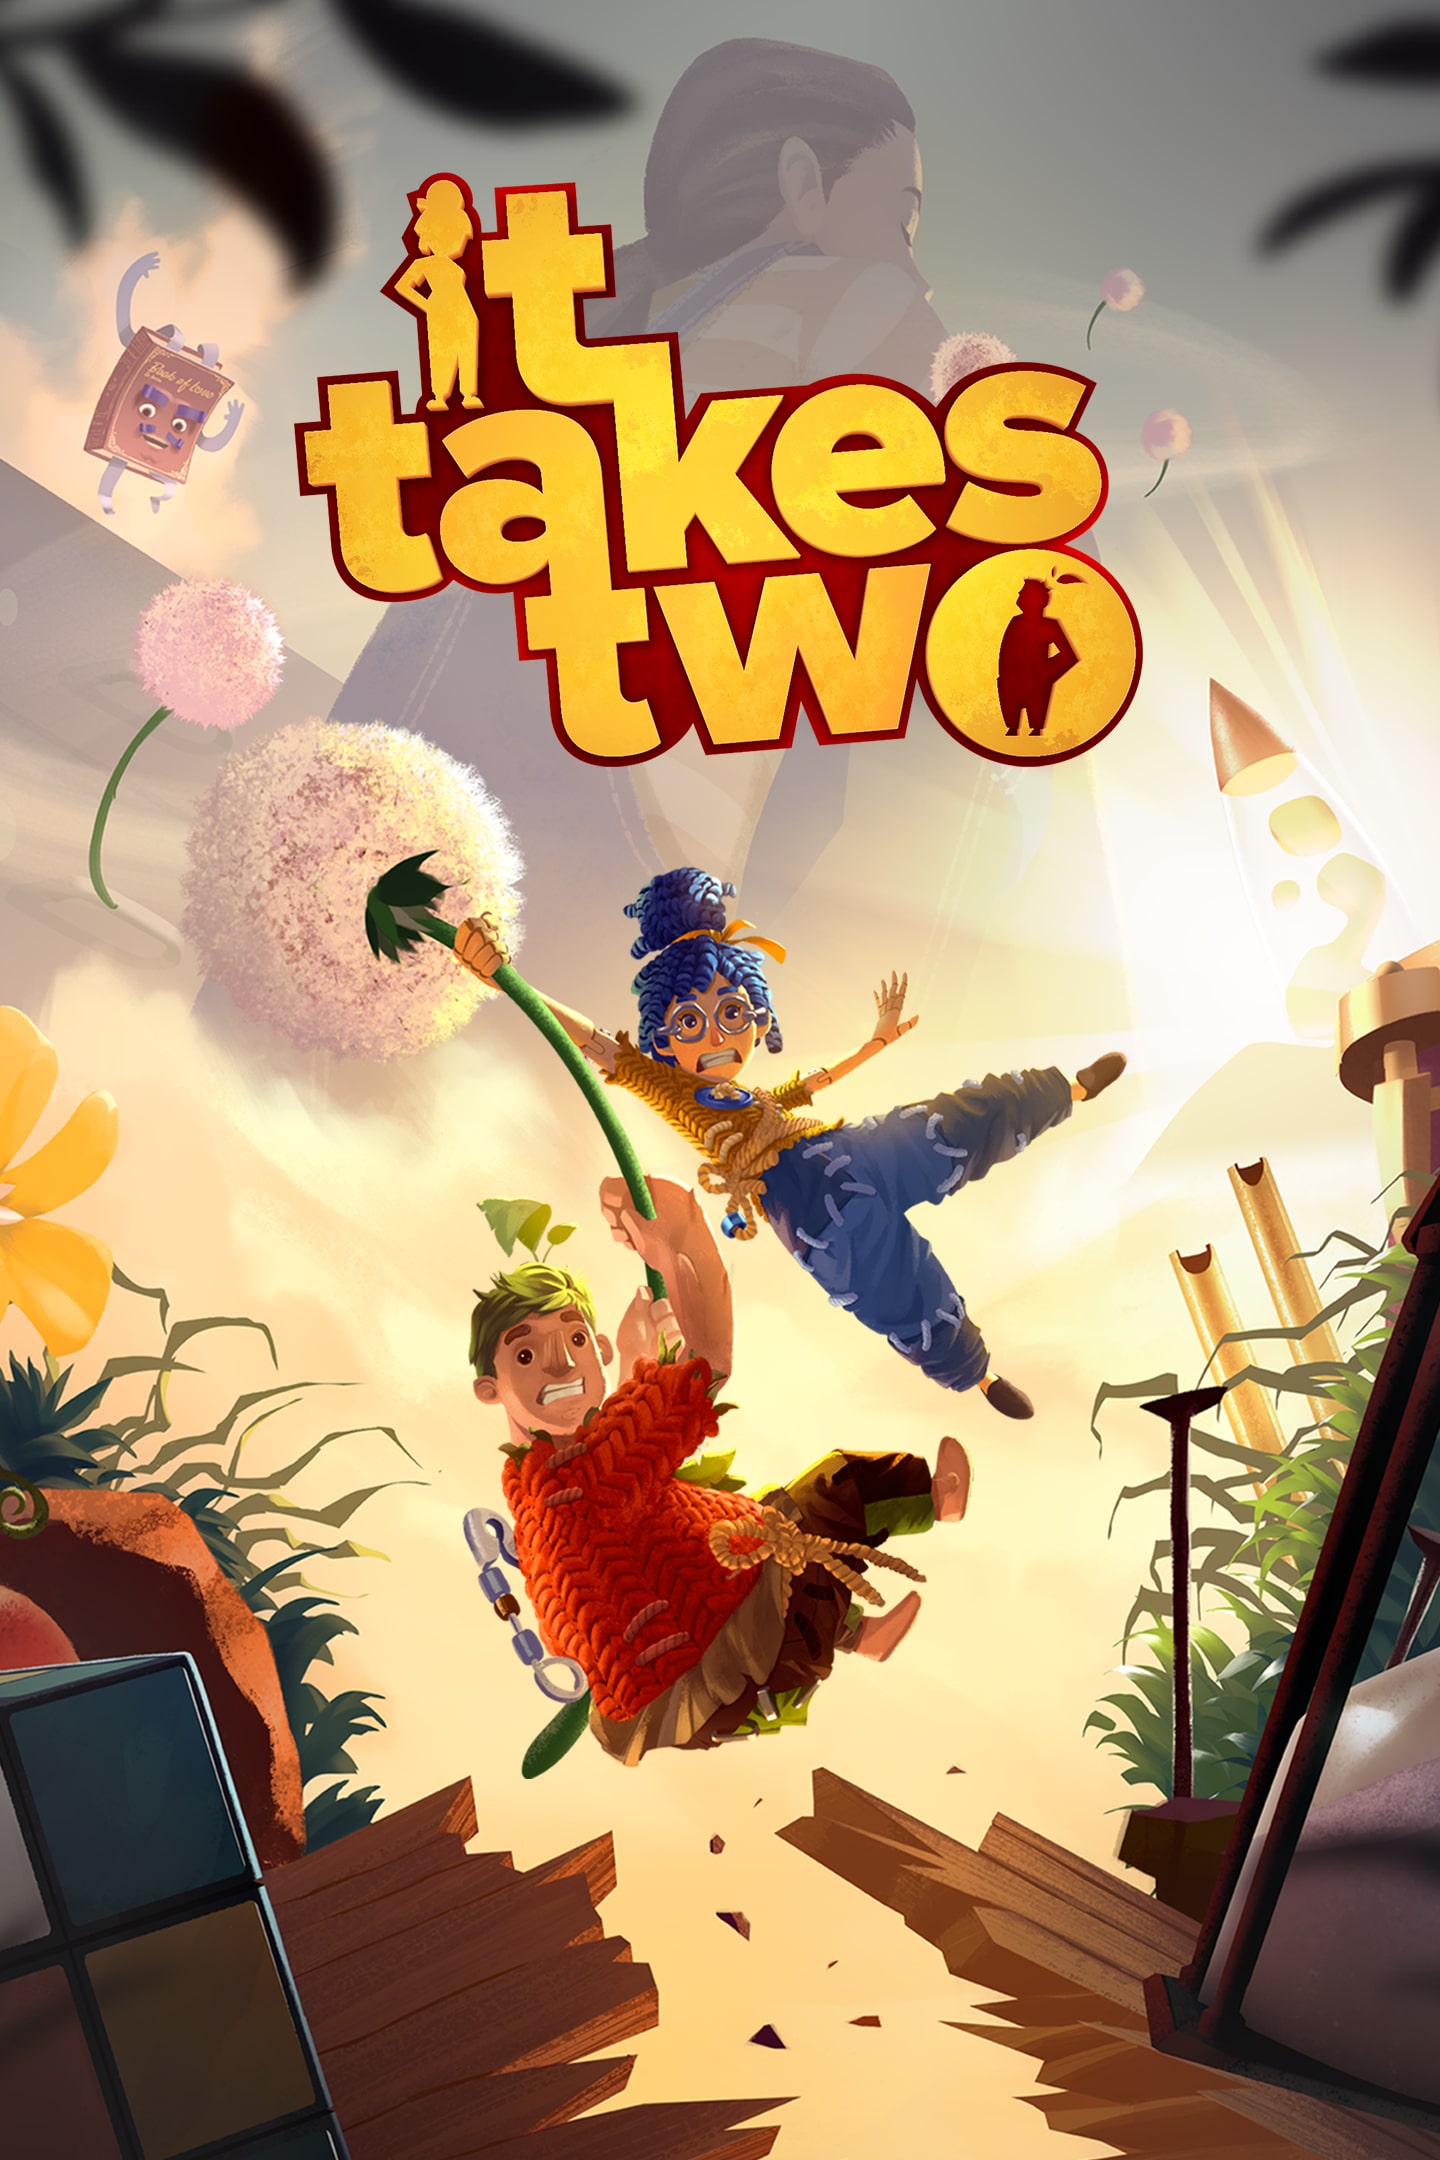 It Takes Two for PlayStation 4